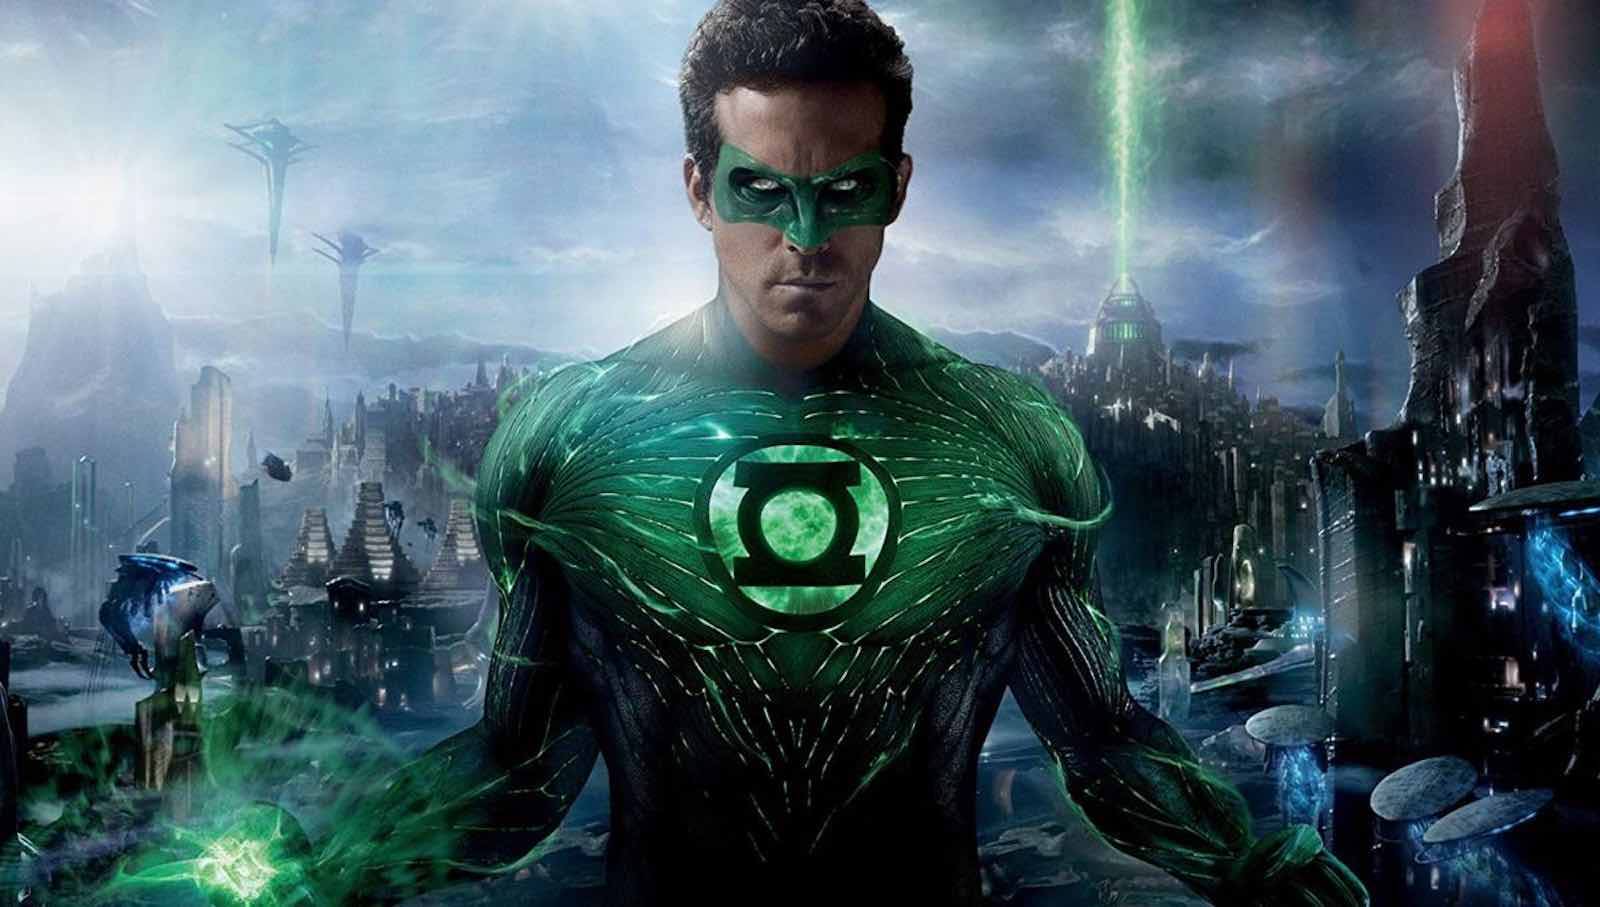 Is the upcoming DC movie, Superman: Legacy, about to host a superhero party? Take a look at Nathan Fillion as Green Lantern!